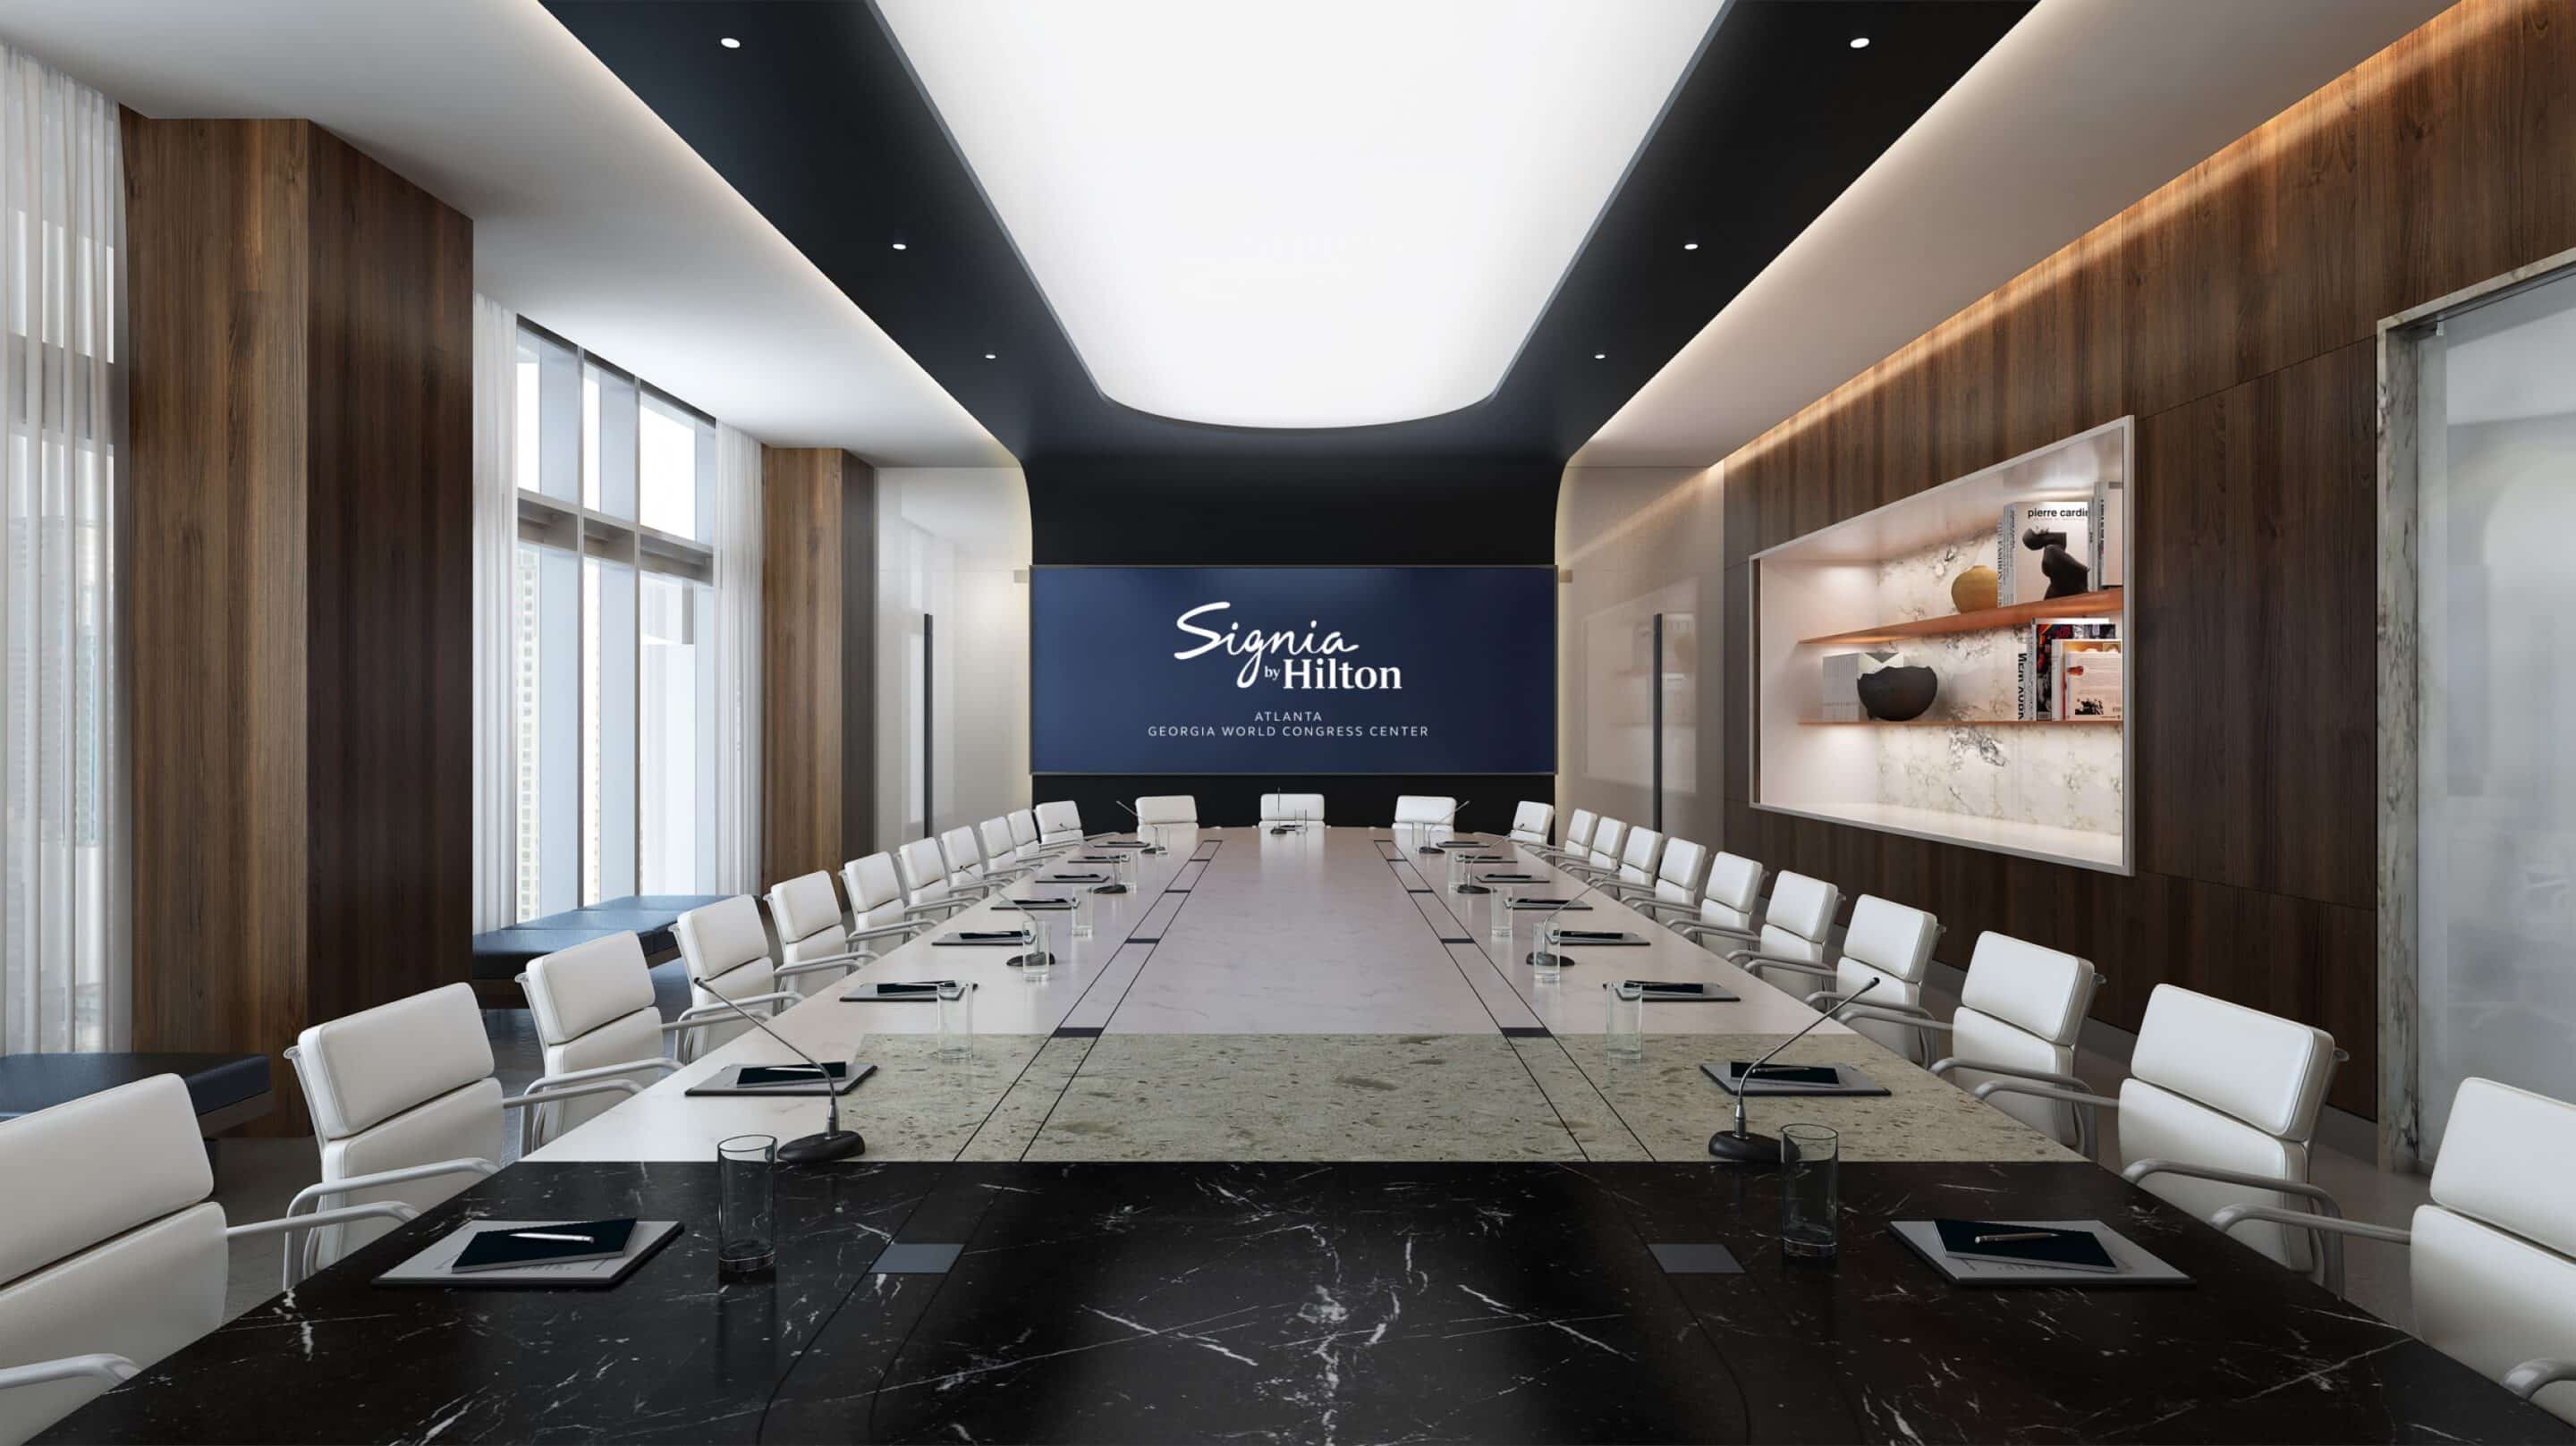 Signia by Hilton Atlanta conference room with large screen